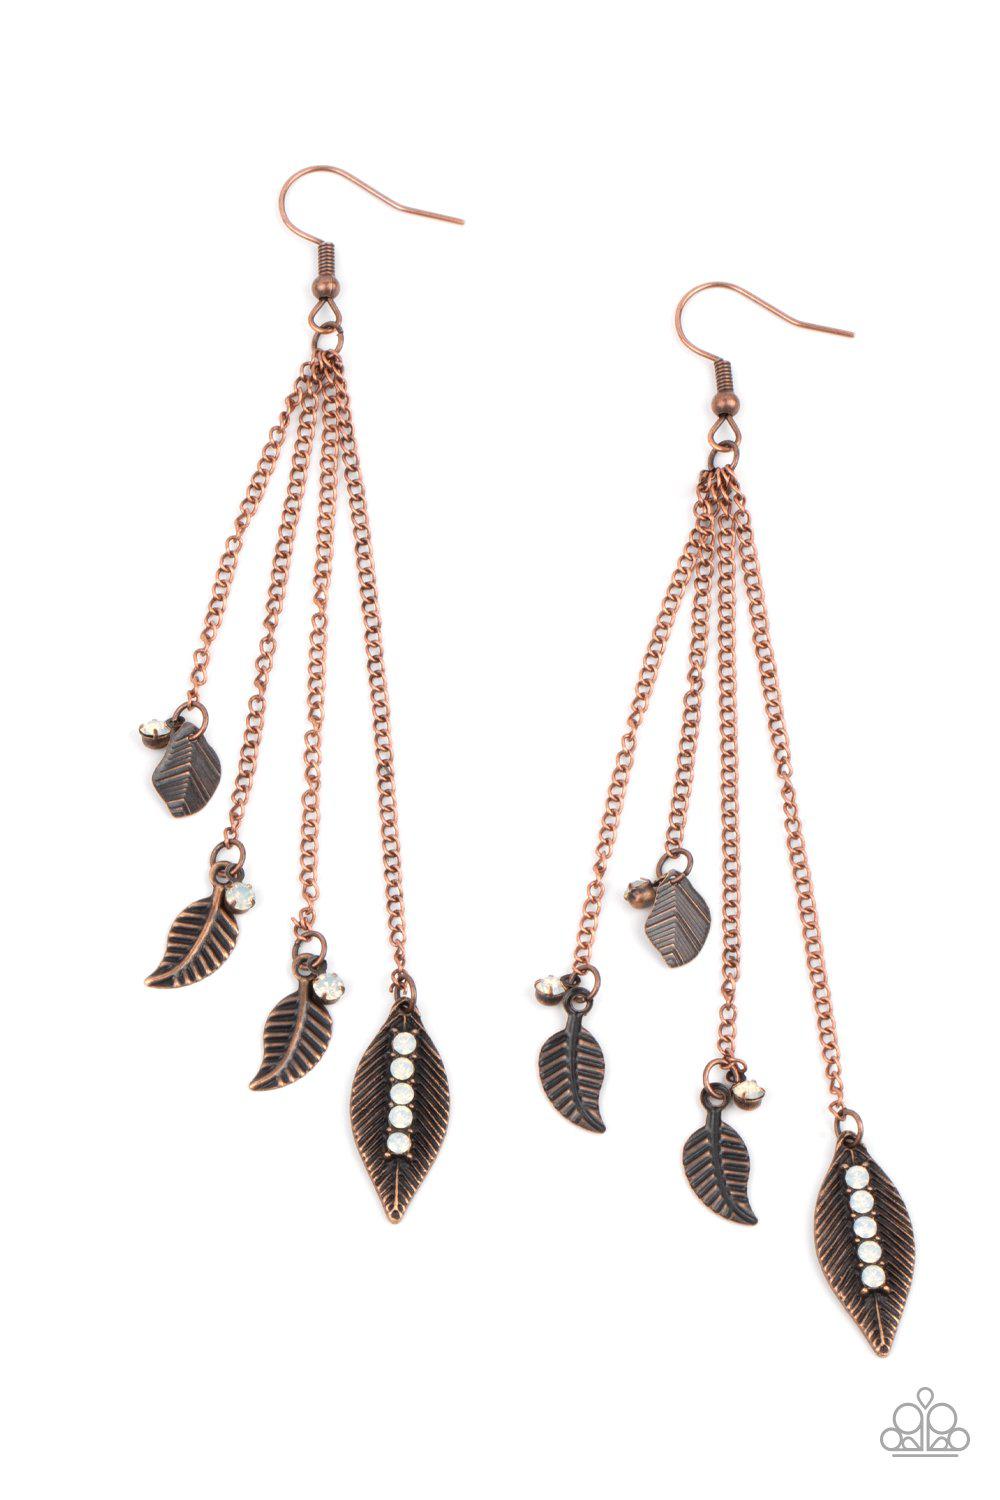 Chiming Leaflets Copper and White Gem Leaf Charm Earrings - Paparazzi Accessories- lightbox - CarasShop.com - $5 Jewelry by Cara Jewels